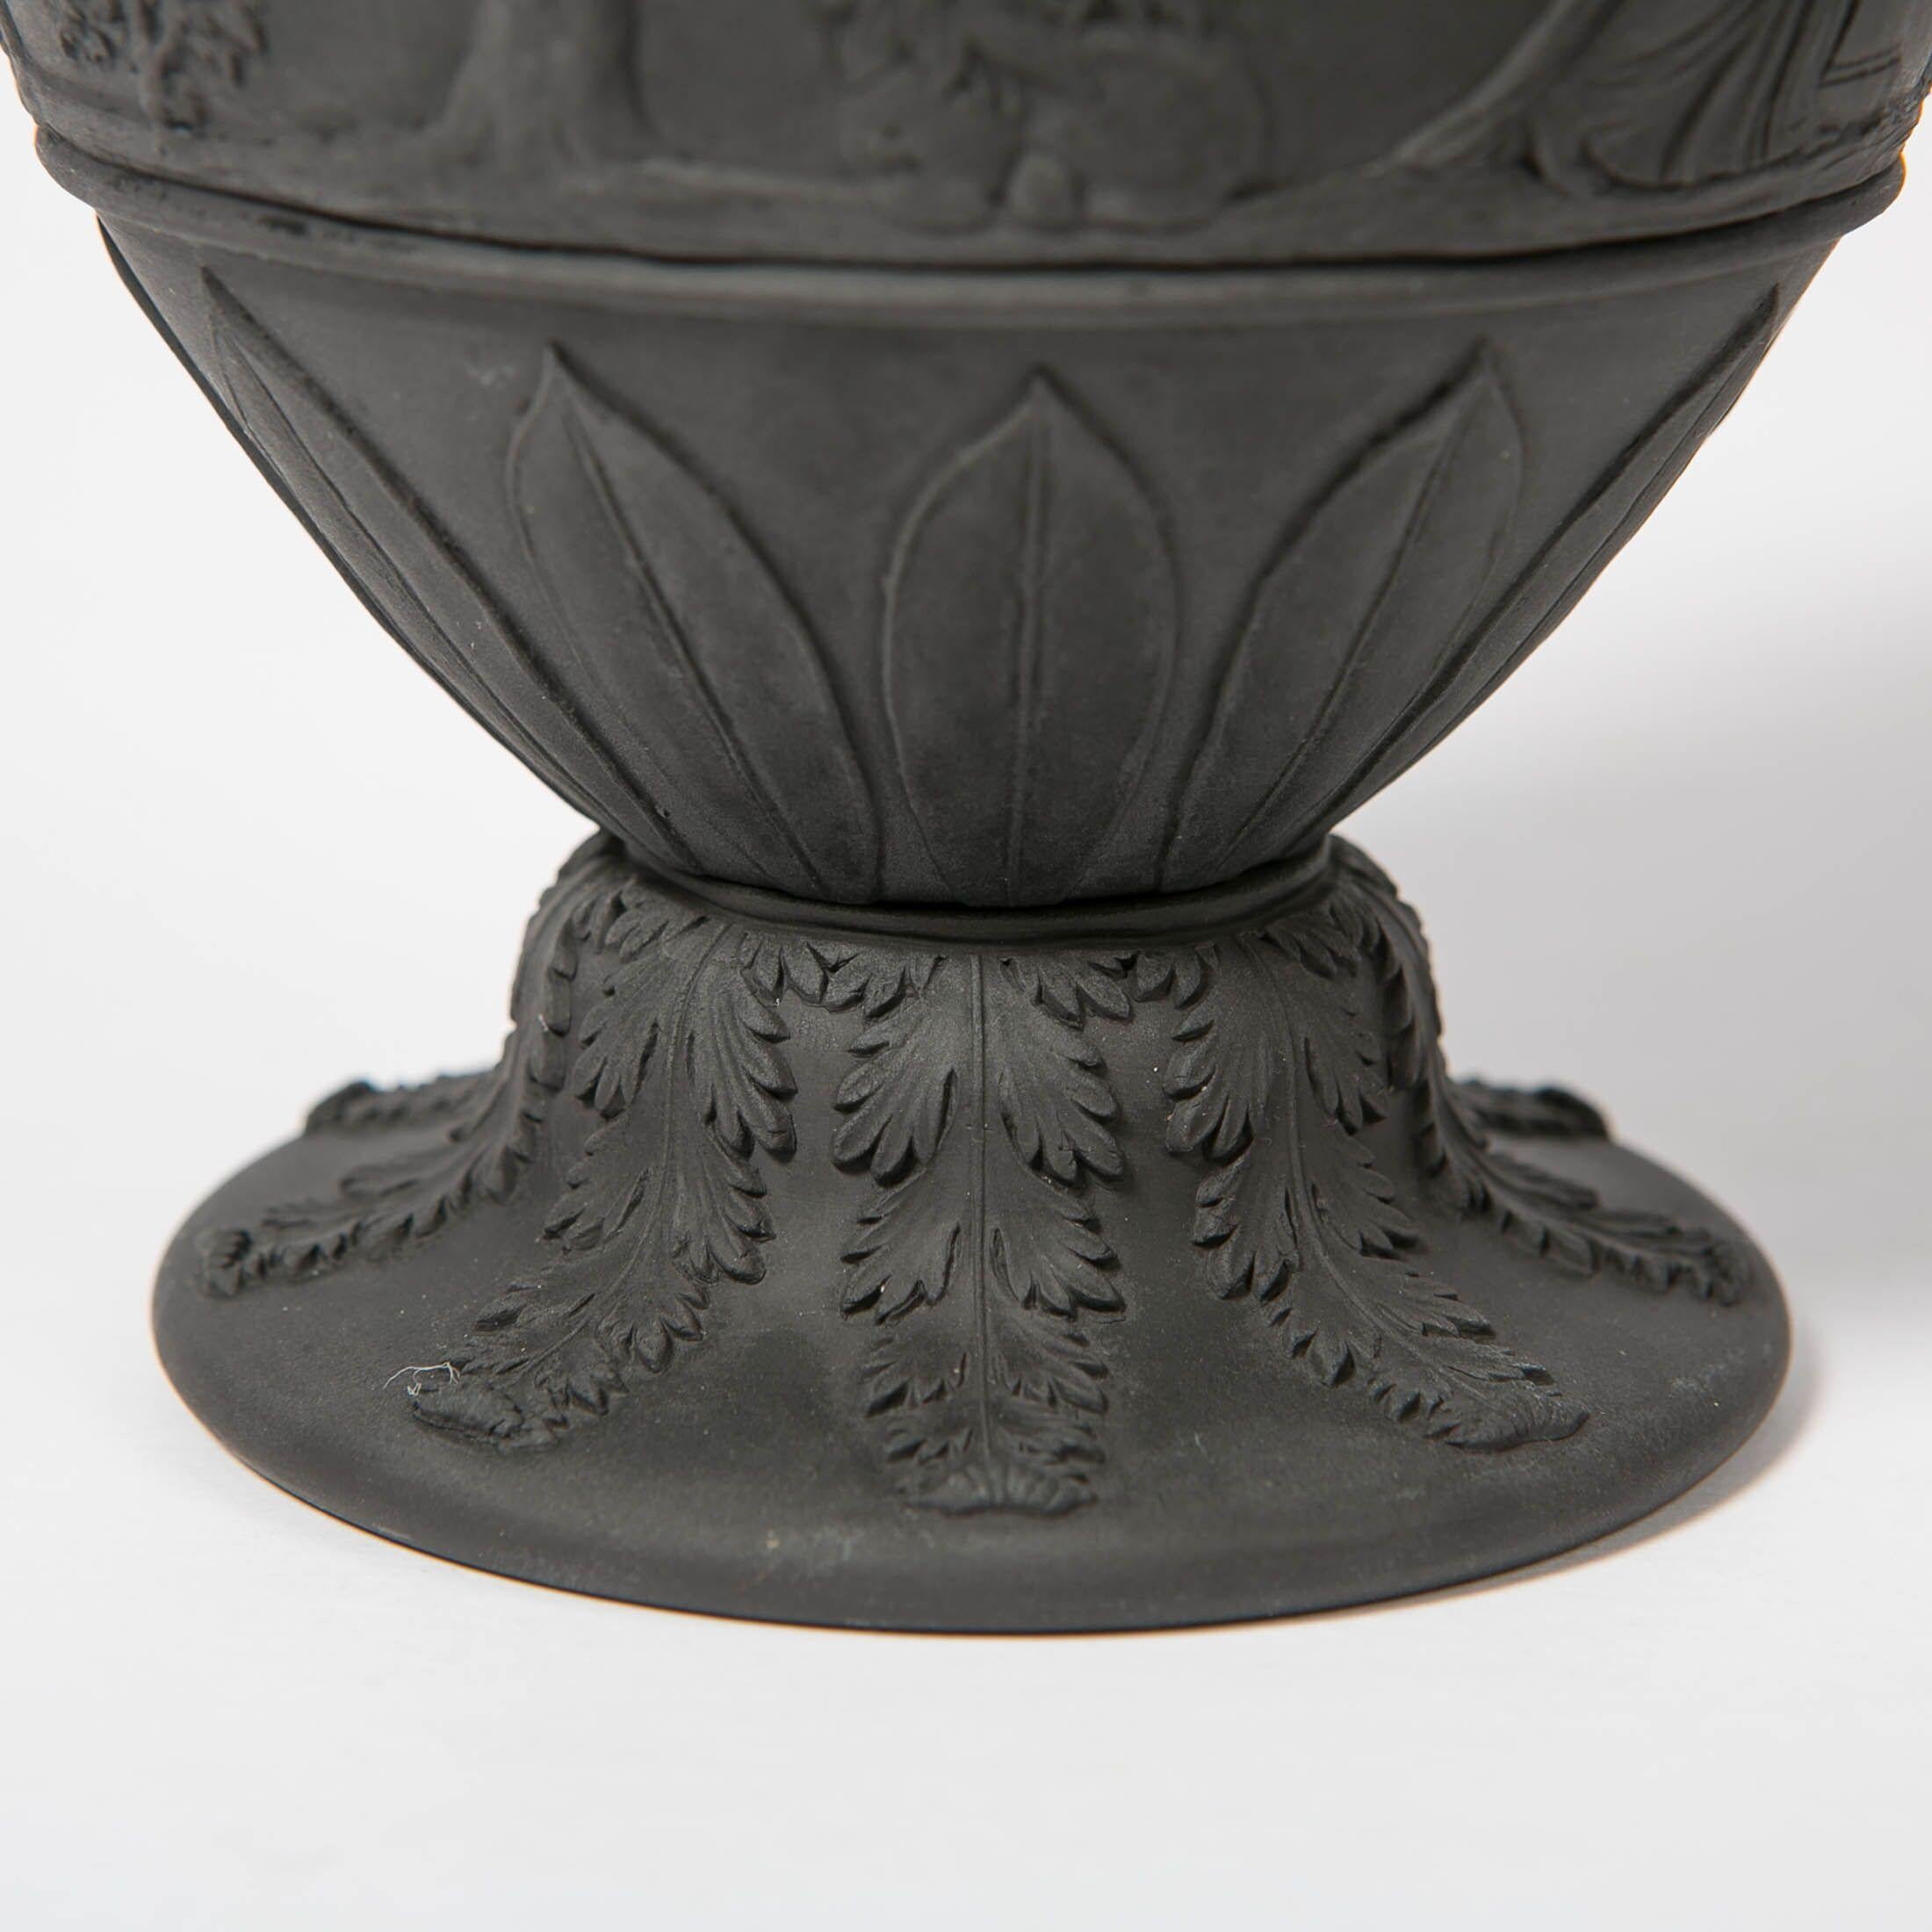 English Wedgwood Black Basalt Vase with Classical Figures Made in England, circa 1840